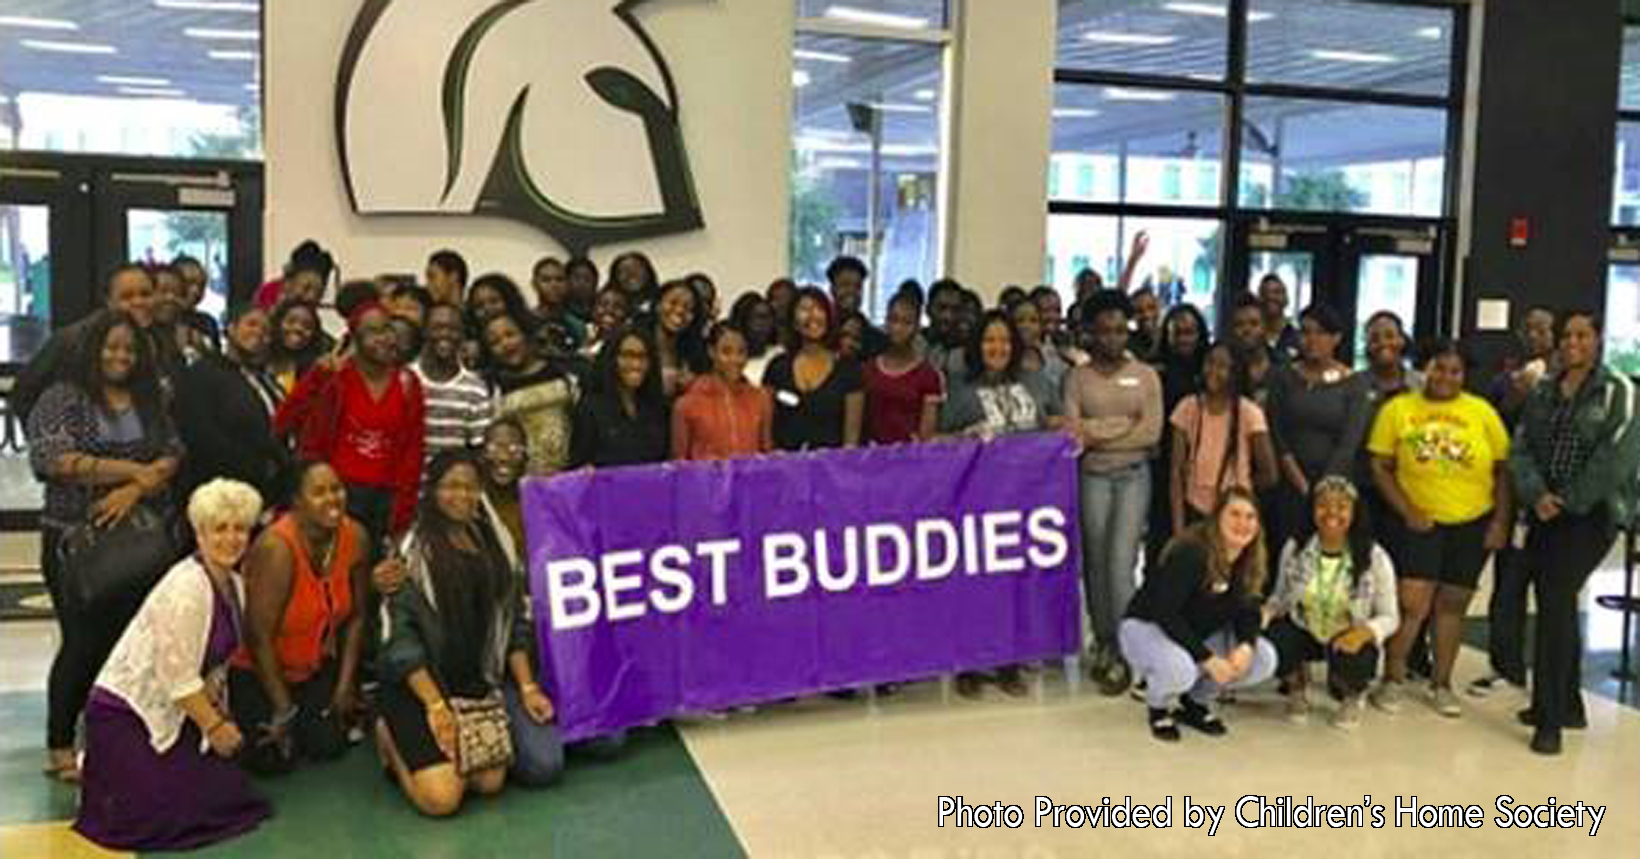 Taken by the Evans media Department of Evans High school, the photo captures students participating in the Best Buddies program. Being sponsored by Ms. DuFour, they had a great turnout celebrating their buddy pairings with food and exciting conversations.